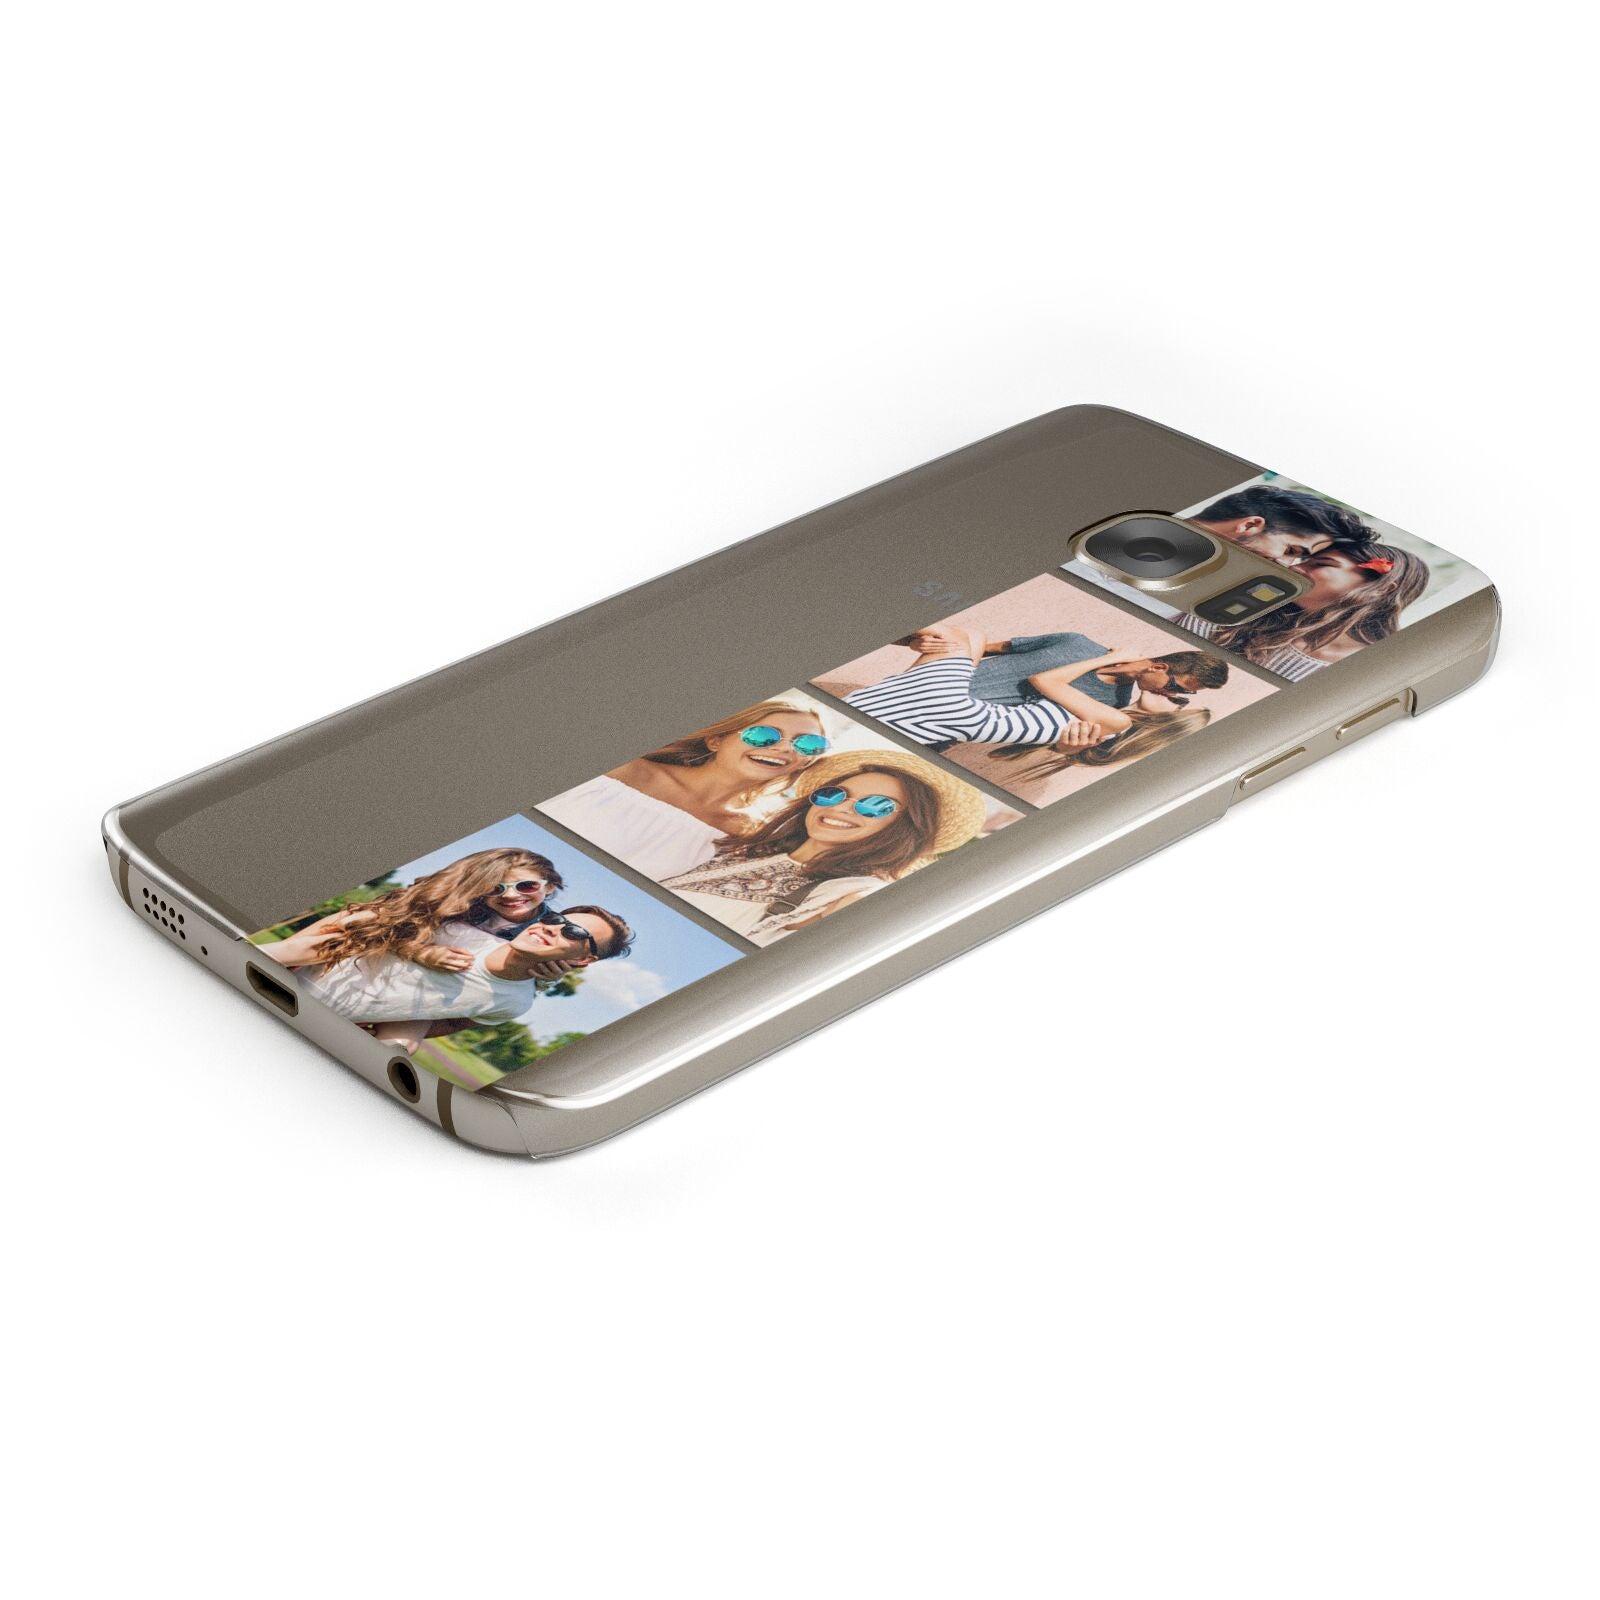 Photo Strip Montage Upload Protective Samsung Galaxy Case Angled Image